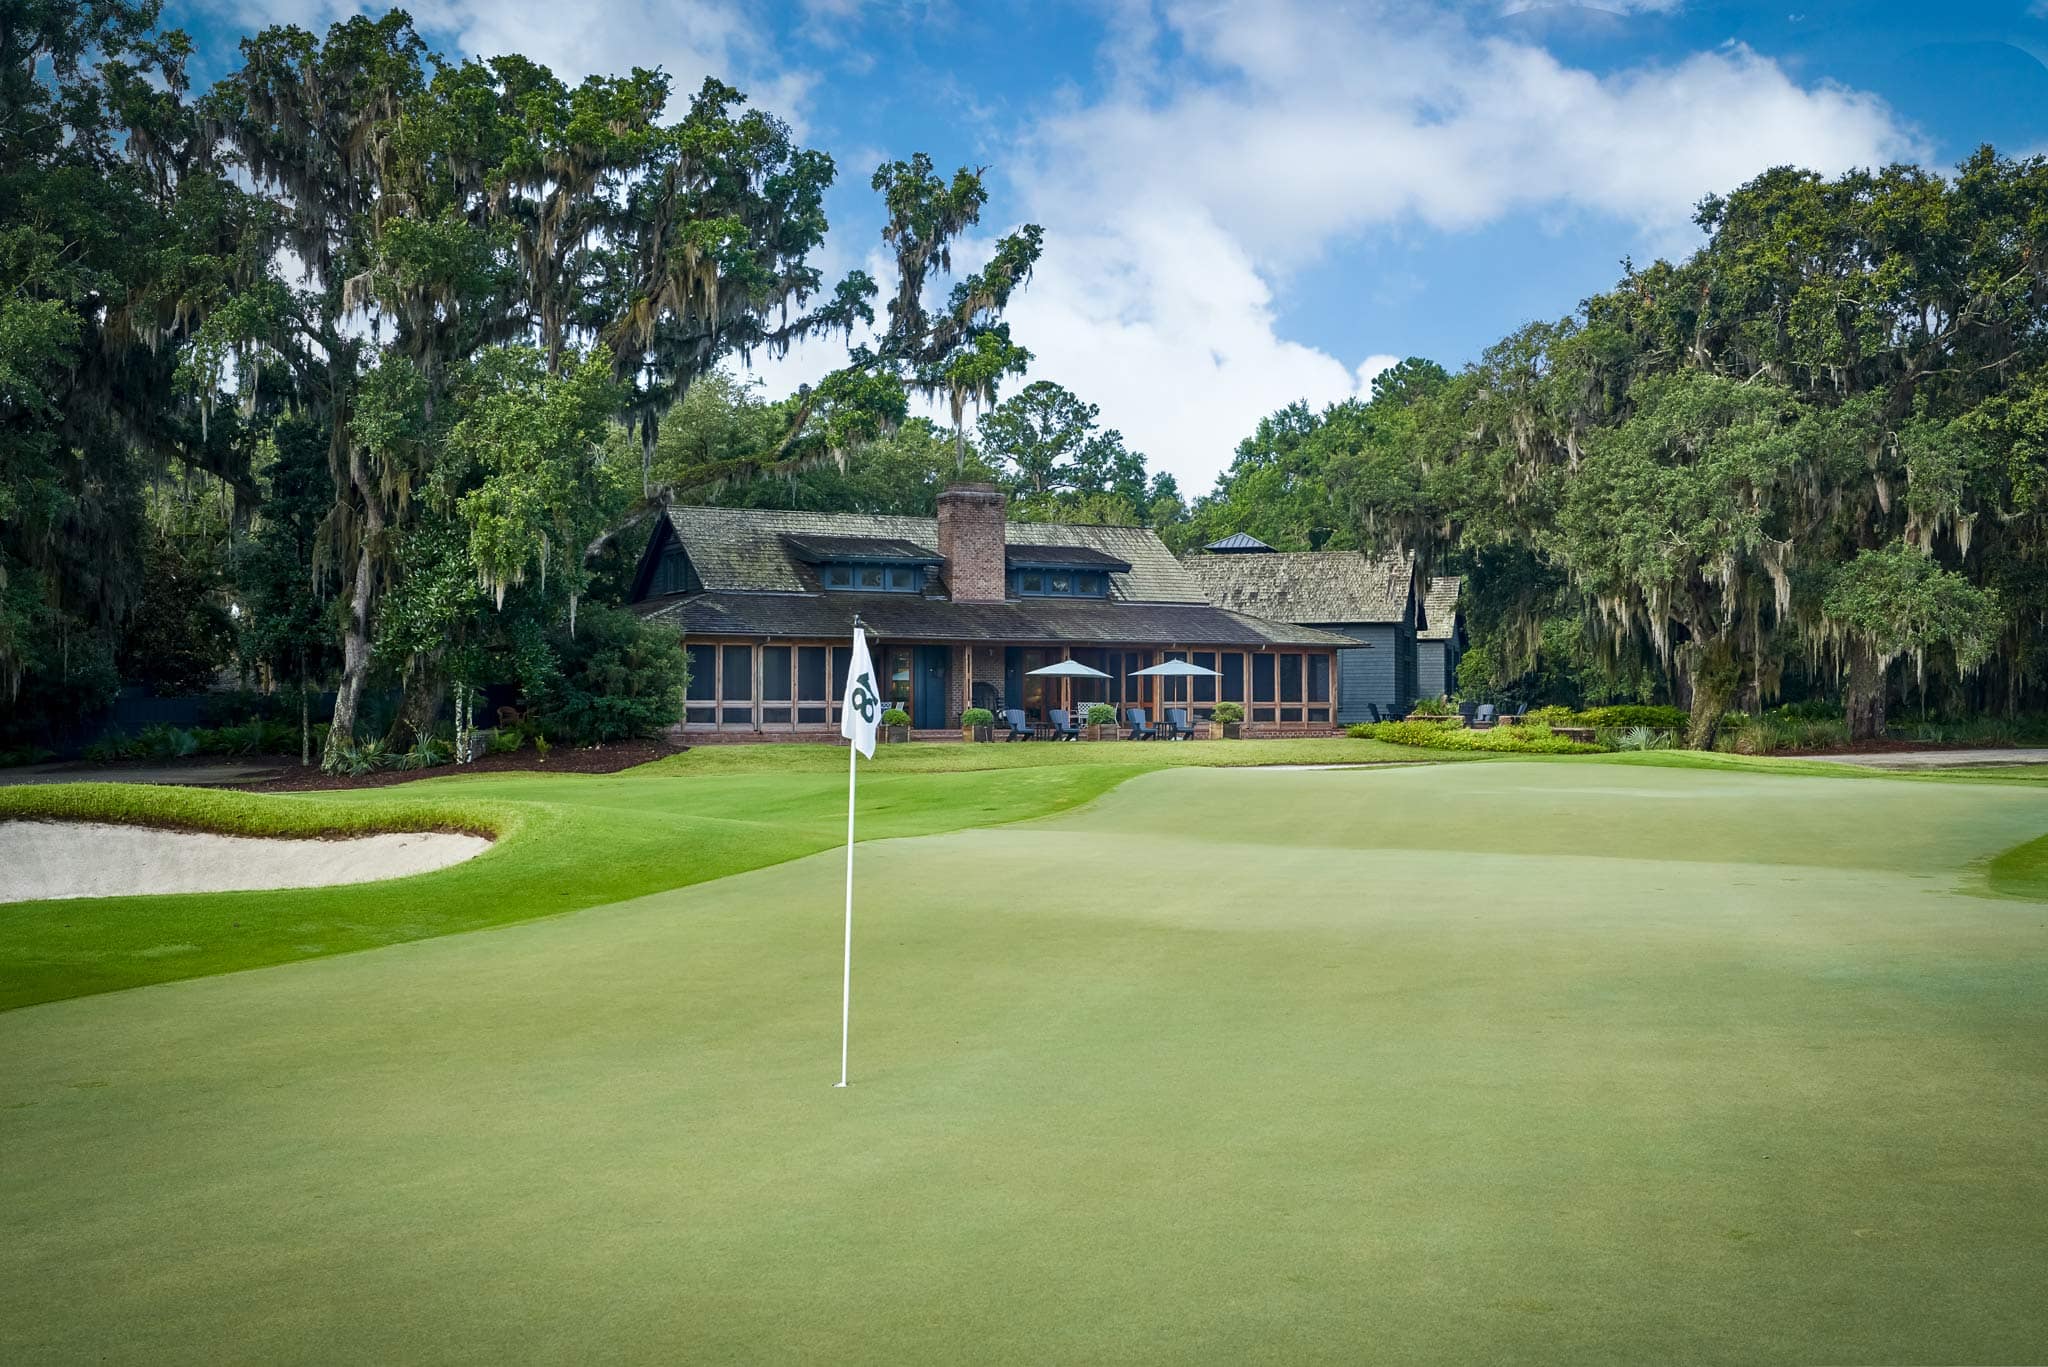 Championship Golf in the Heart of the Lowcountry - Bluffton, Palmetto Bluff  & HHI Realtors